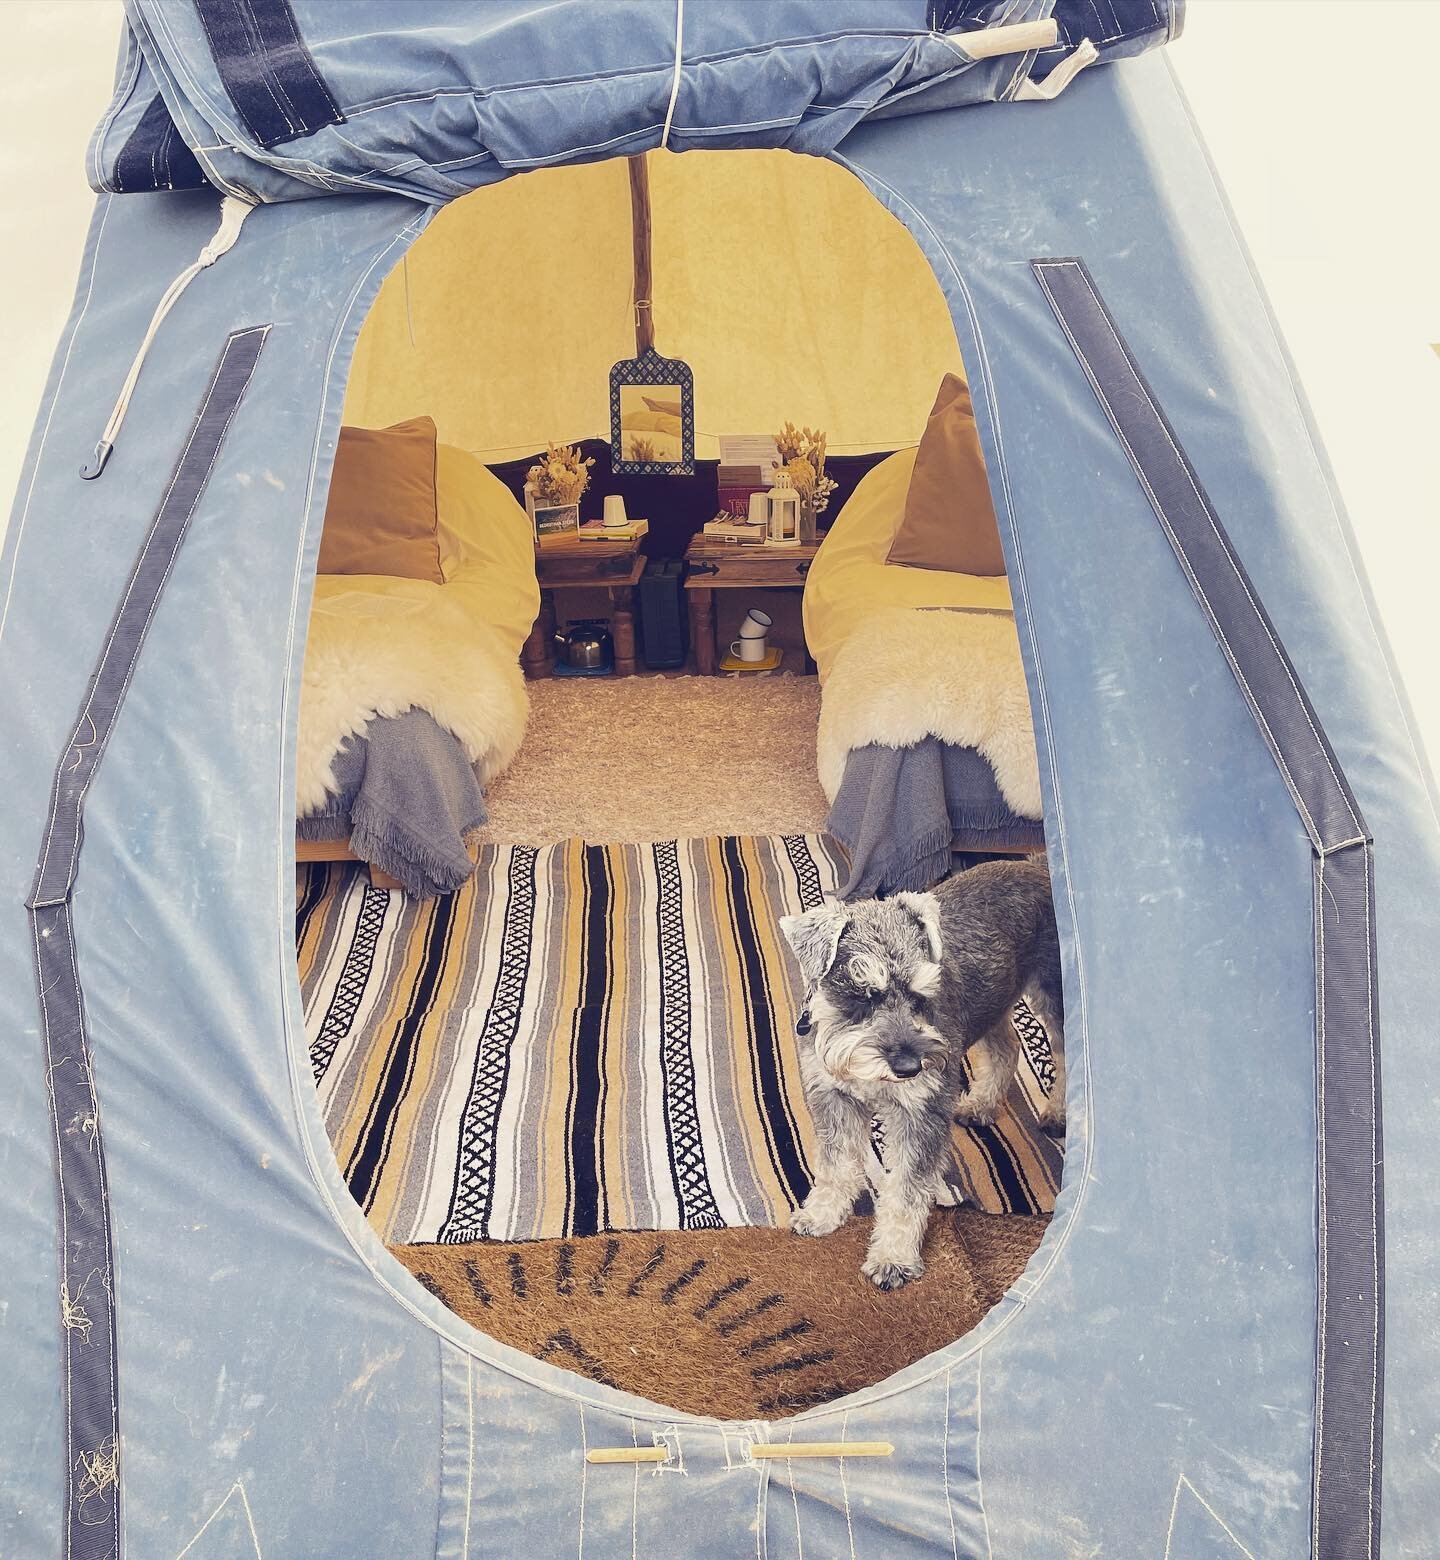 // QUALITY CONTROL //

We keep to high standards at Seaview - especially when Badger is on patrol. Our resident mini schnauzer likes to check the tipis out before guests arrive - just to make sure the sheets are just right, the water is fresh, the sh